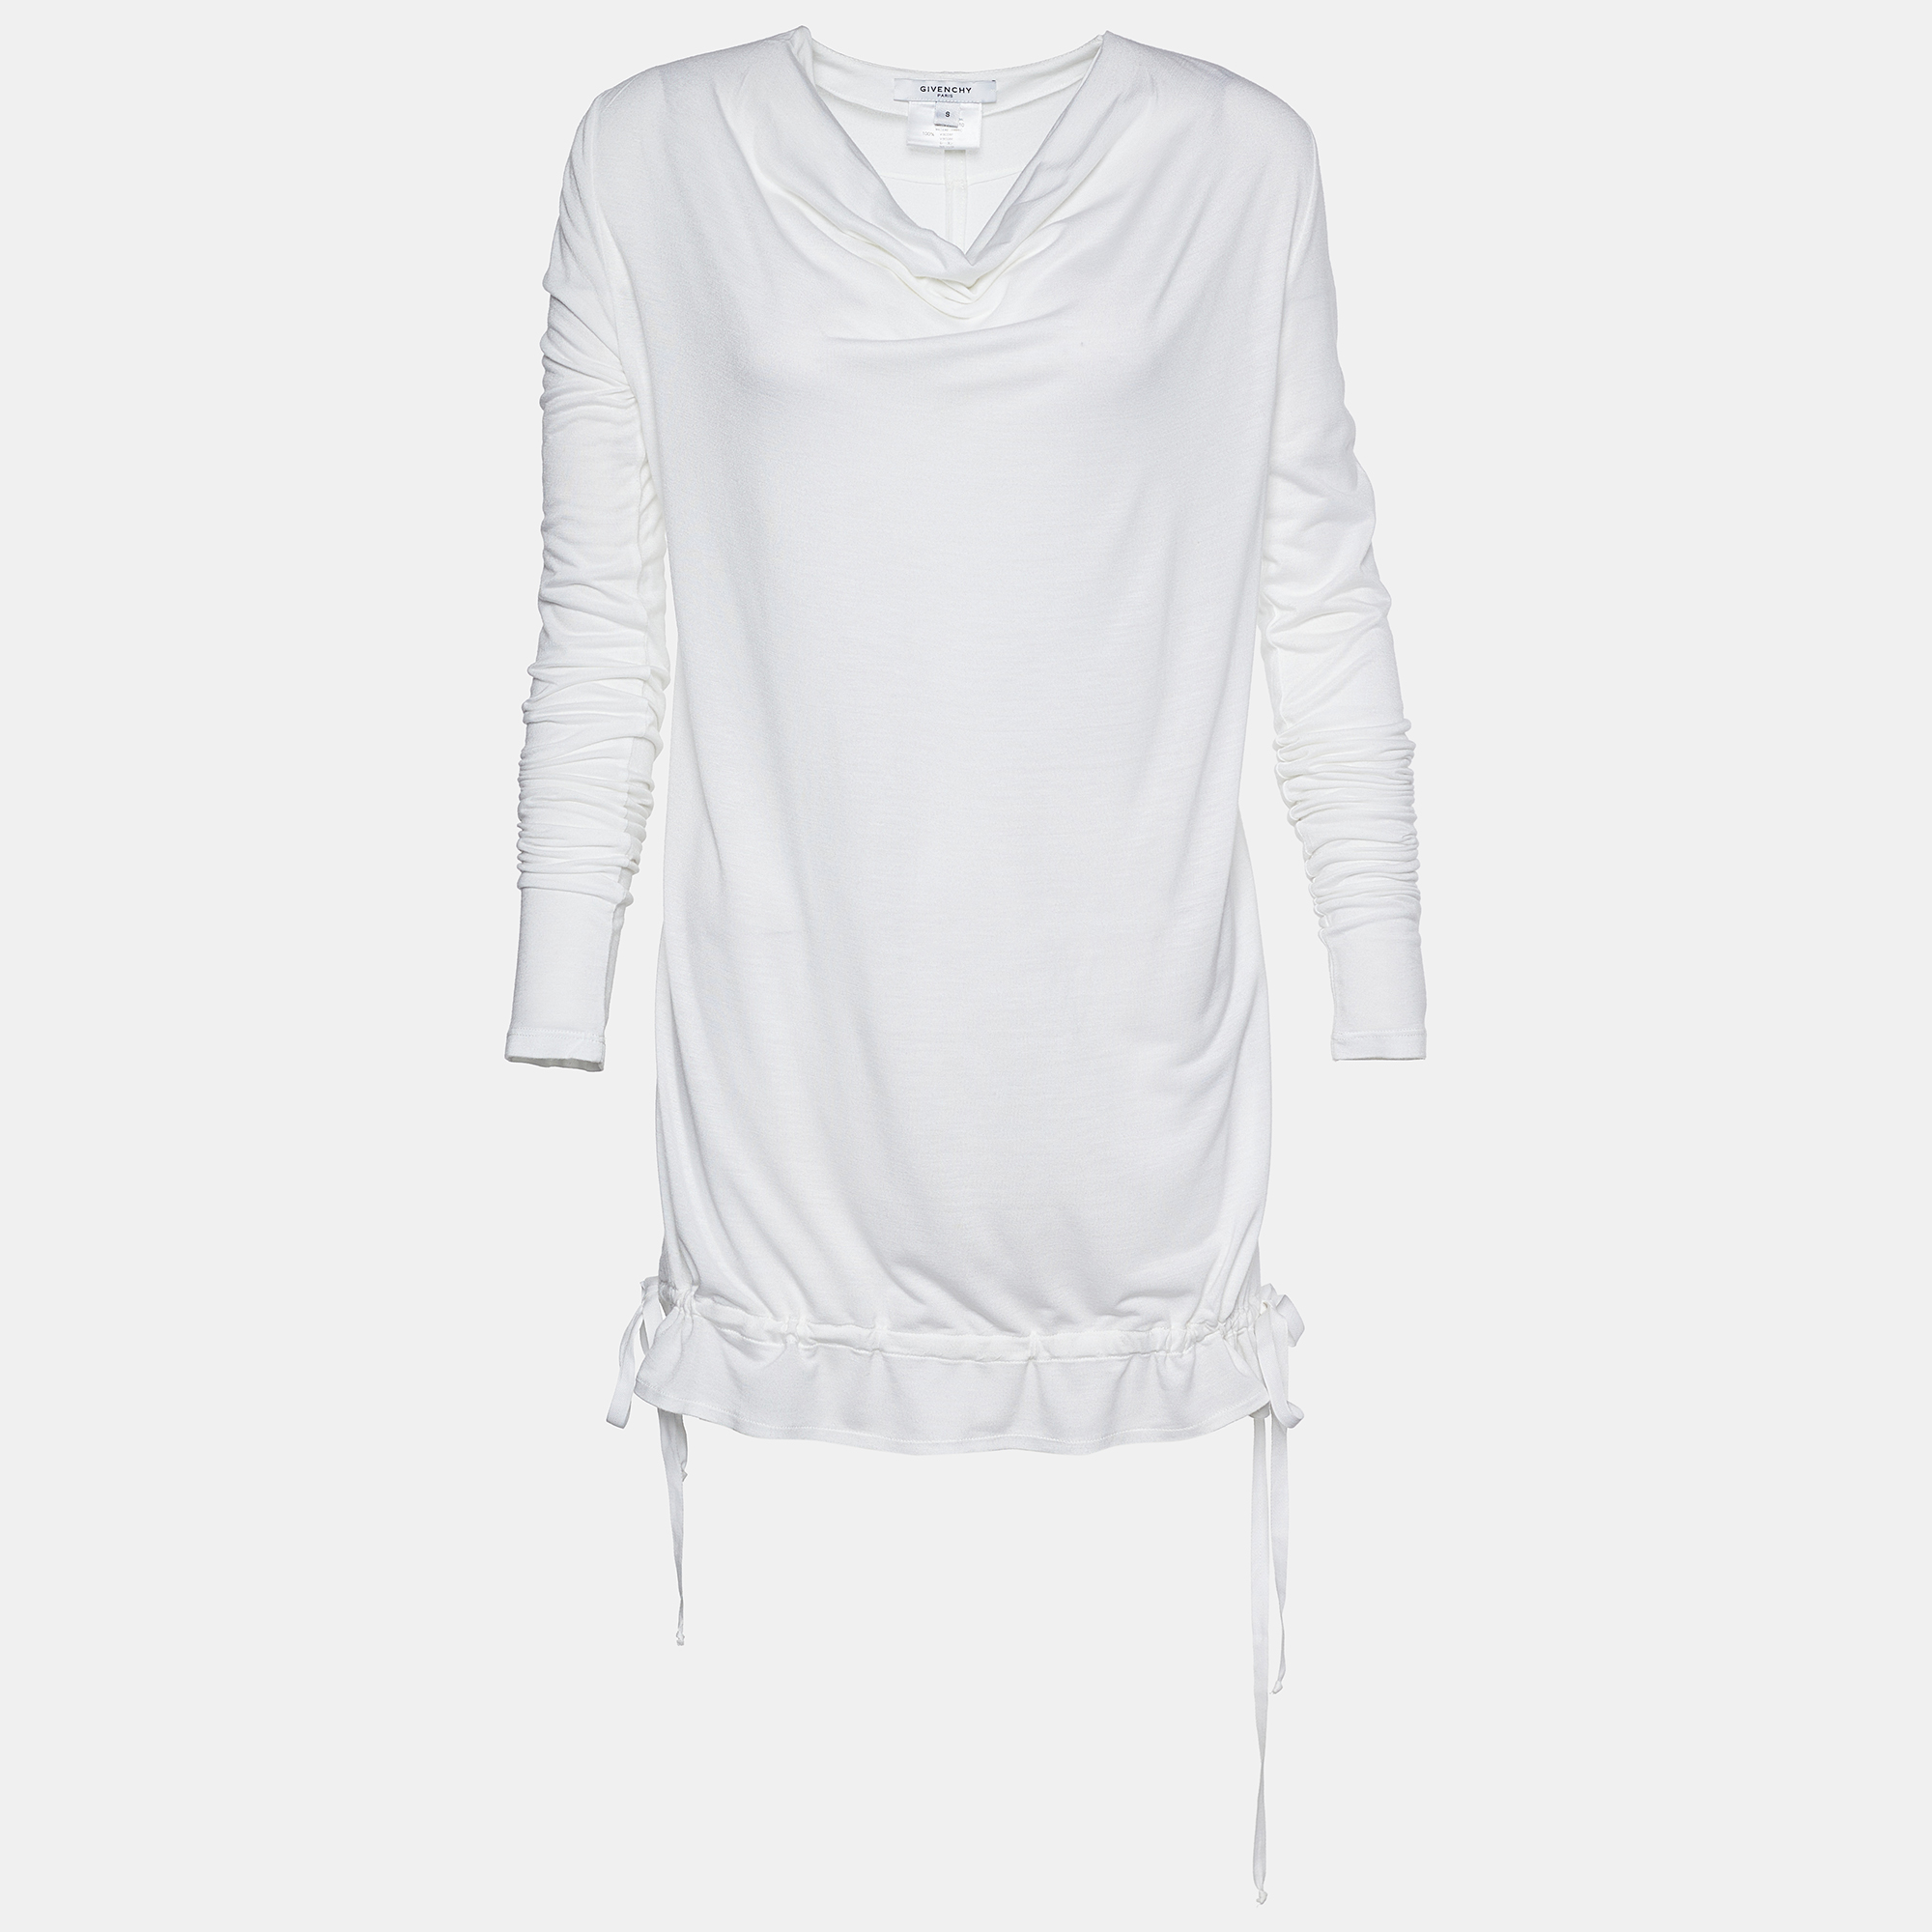 Givenchy white knit full sleeve top s